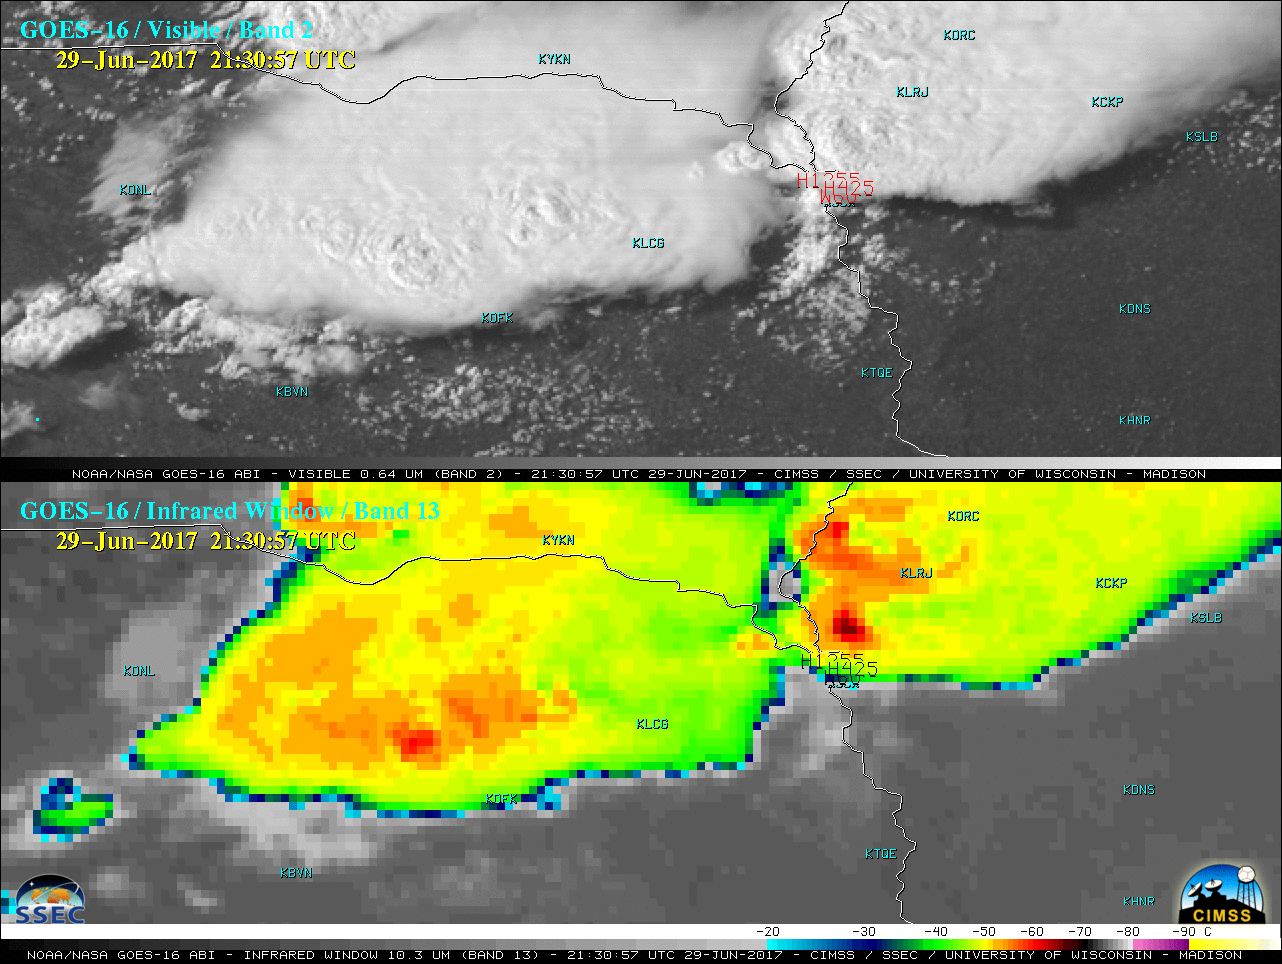 GOES-16 Visible (0.64 µm, top) and Infrared Window (10.3 µm, bottom) images, with SPC storm reports plotted in red (on Visible) and black (on Infrared) [Click to play MP4 animation]GOES-16 Visible (0.64 µm, top) and Infrared Window (10.3 µm, bottom) images, with SPC storm reports plotted in red (on Visible) and black (on Infrared) [Click to play MP4 animation]